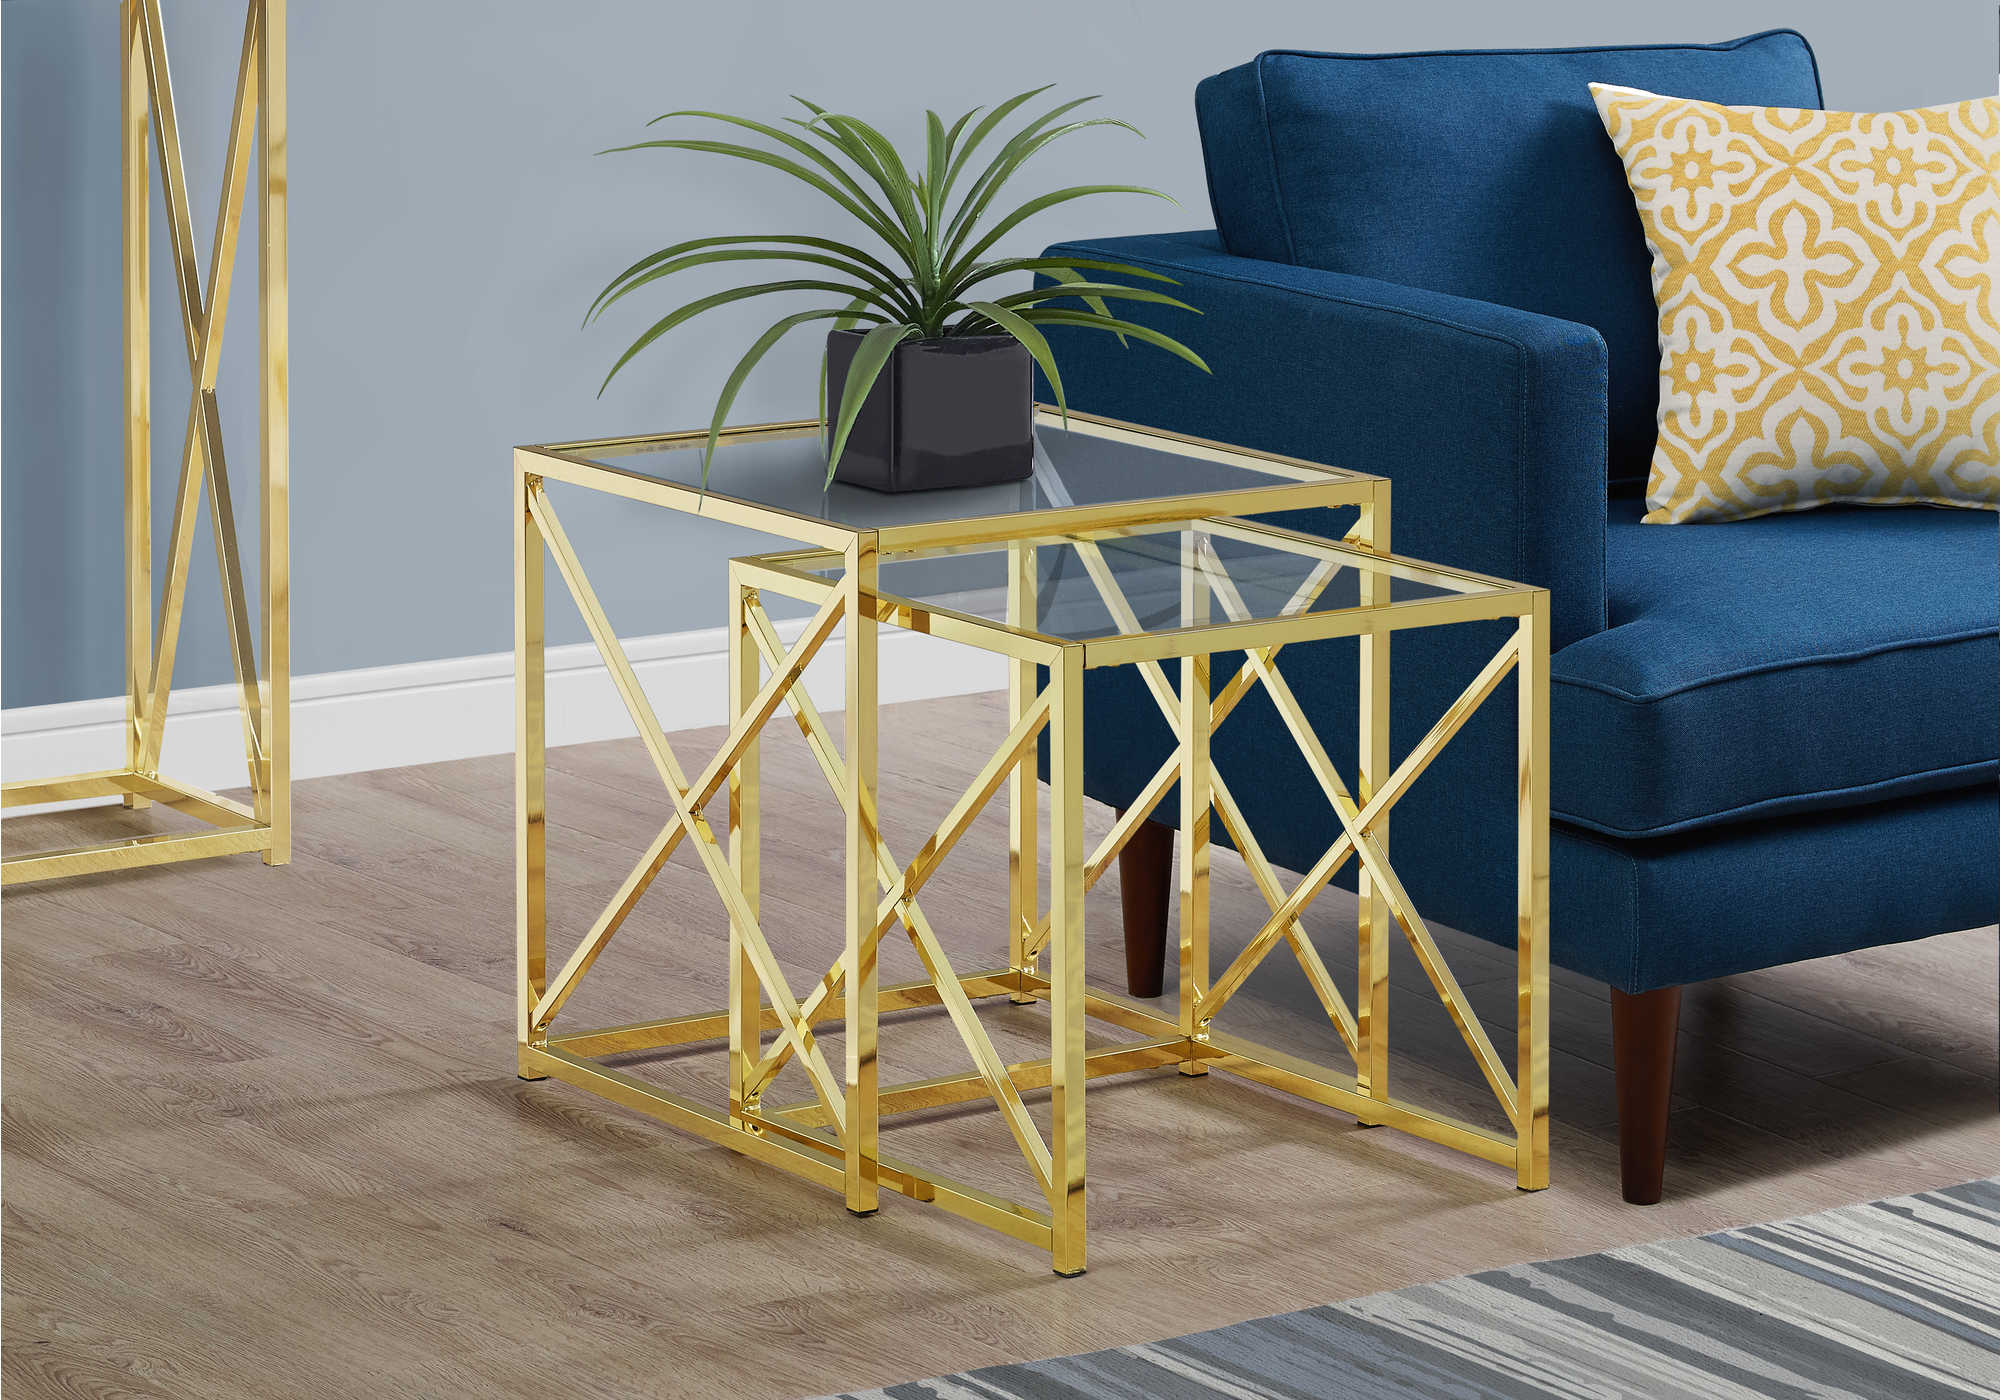 NESTING TABLE - 2PCS SET / GOLD METAL WITH TEMPERED GLASS